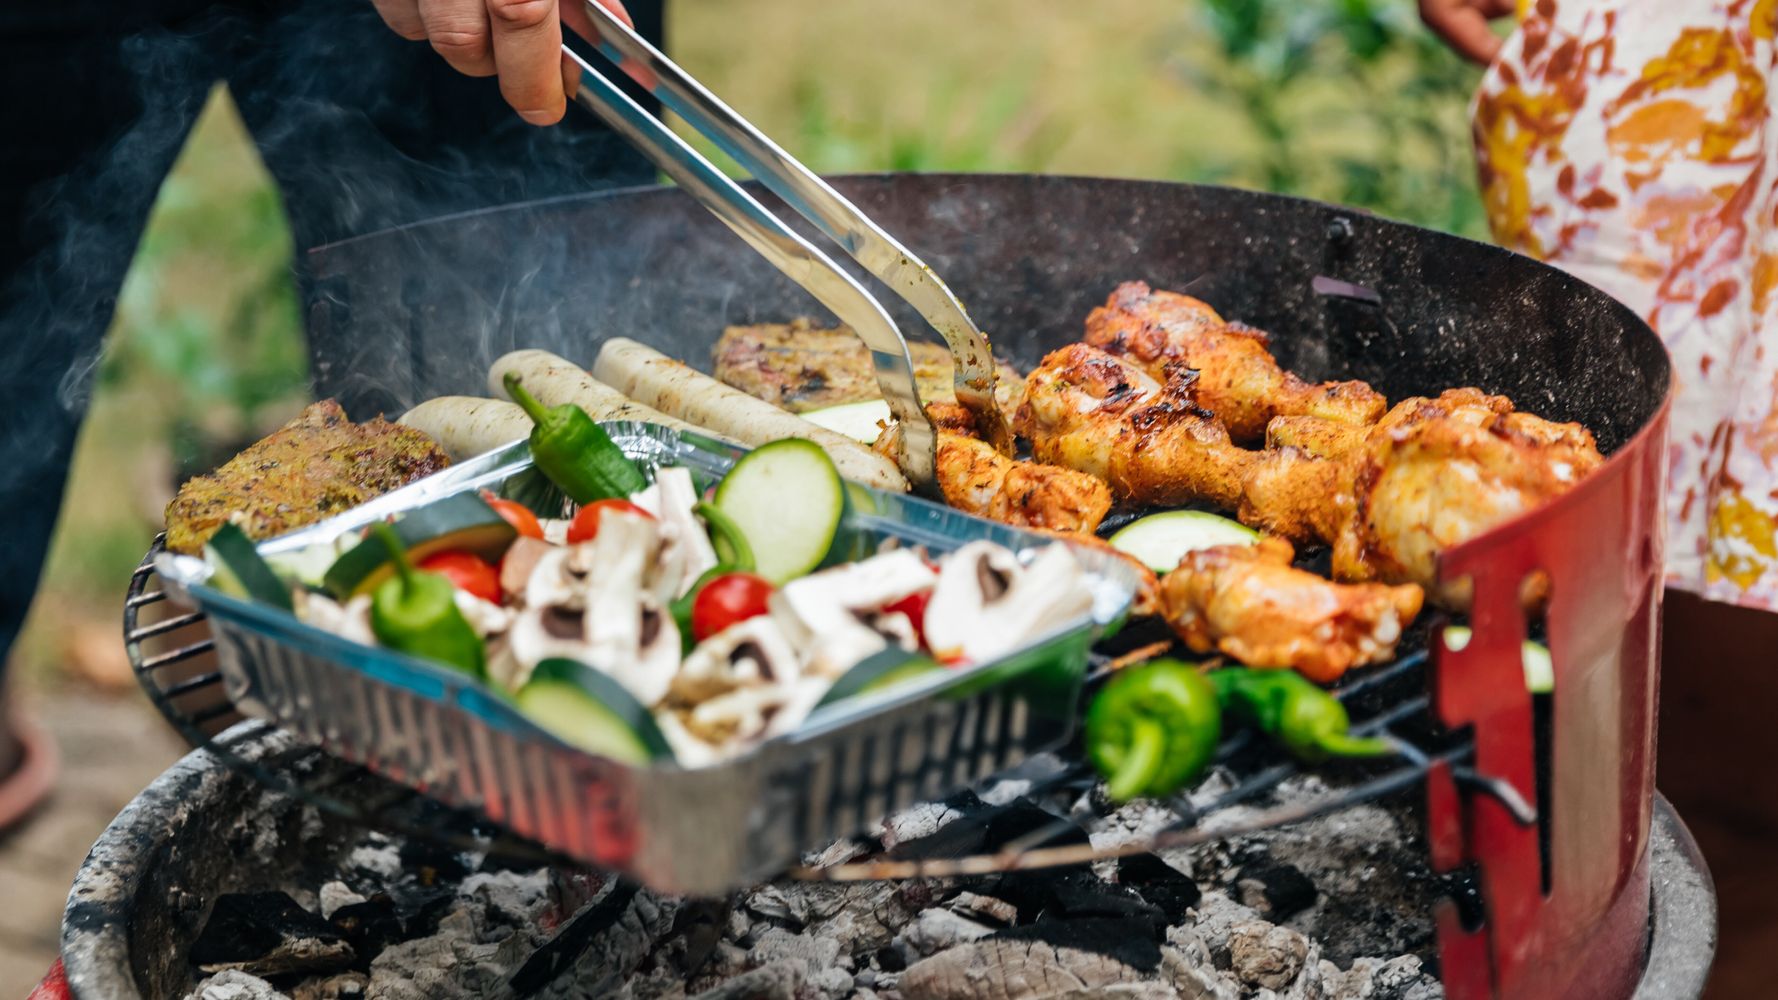 The Best BBQ Food To Buy From Supermarkets In 2020 Revealed